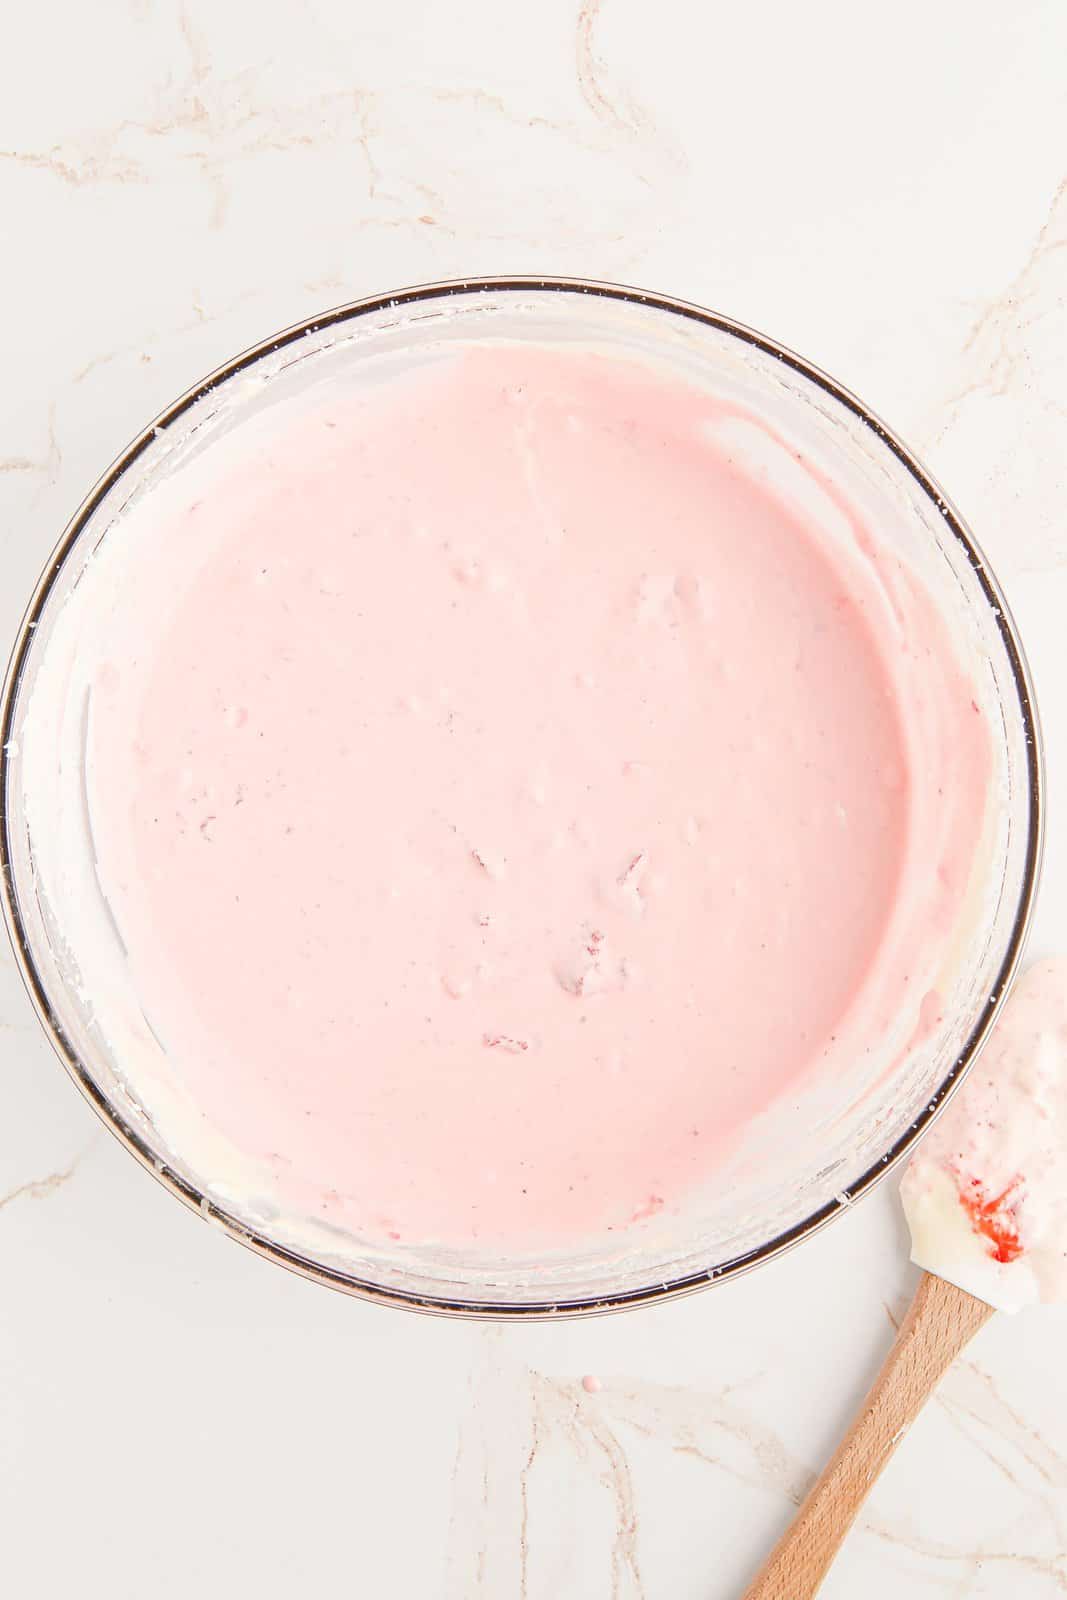 Sweetened condensed milk and mashed strawberries folded into the whipped cream.